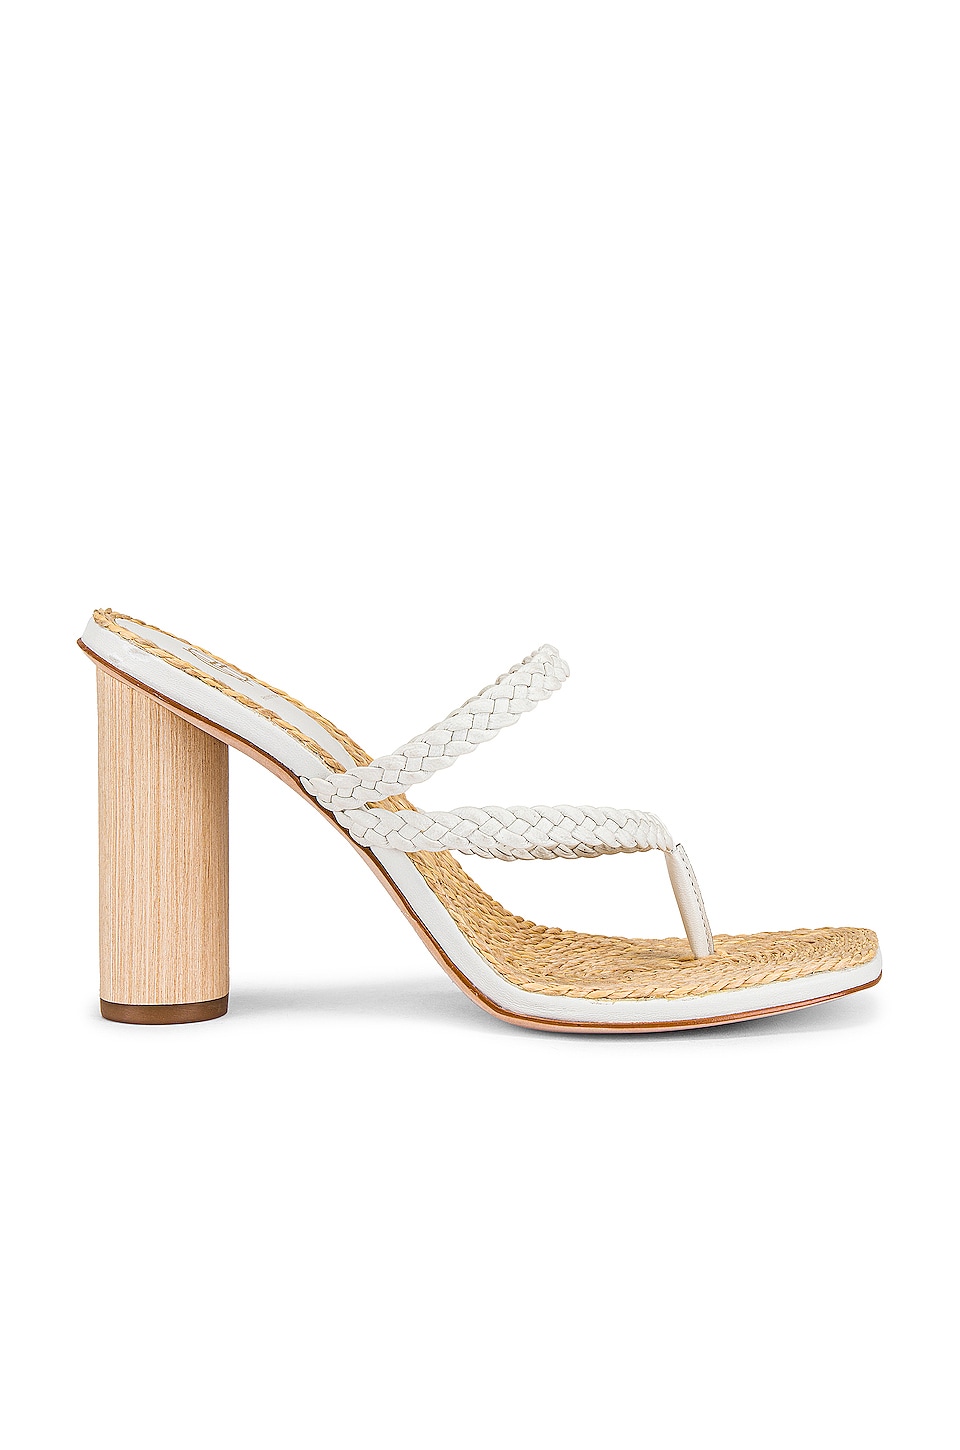 House of Harlow 1960 x REVOLVE Matie Braided Sandal in White